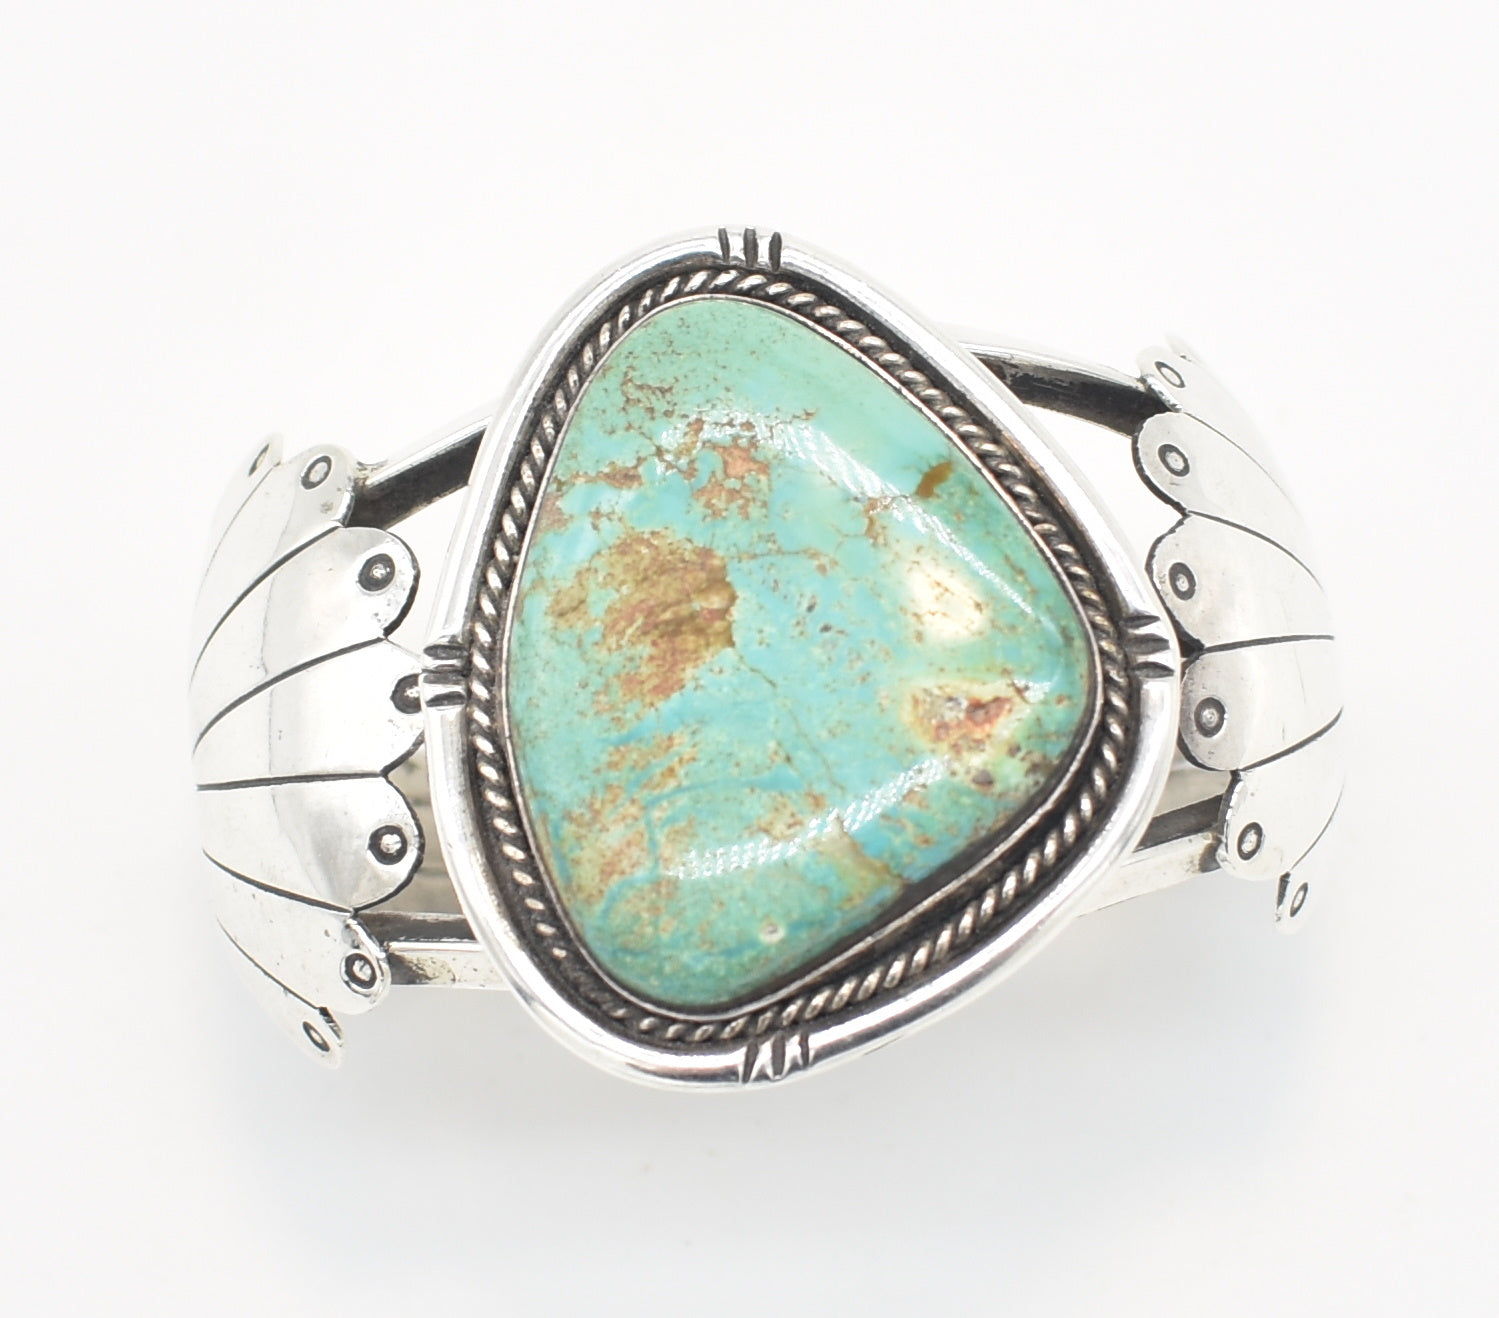 Larger Slab Turquoise and Sterling Silver Southwestern Cuff